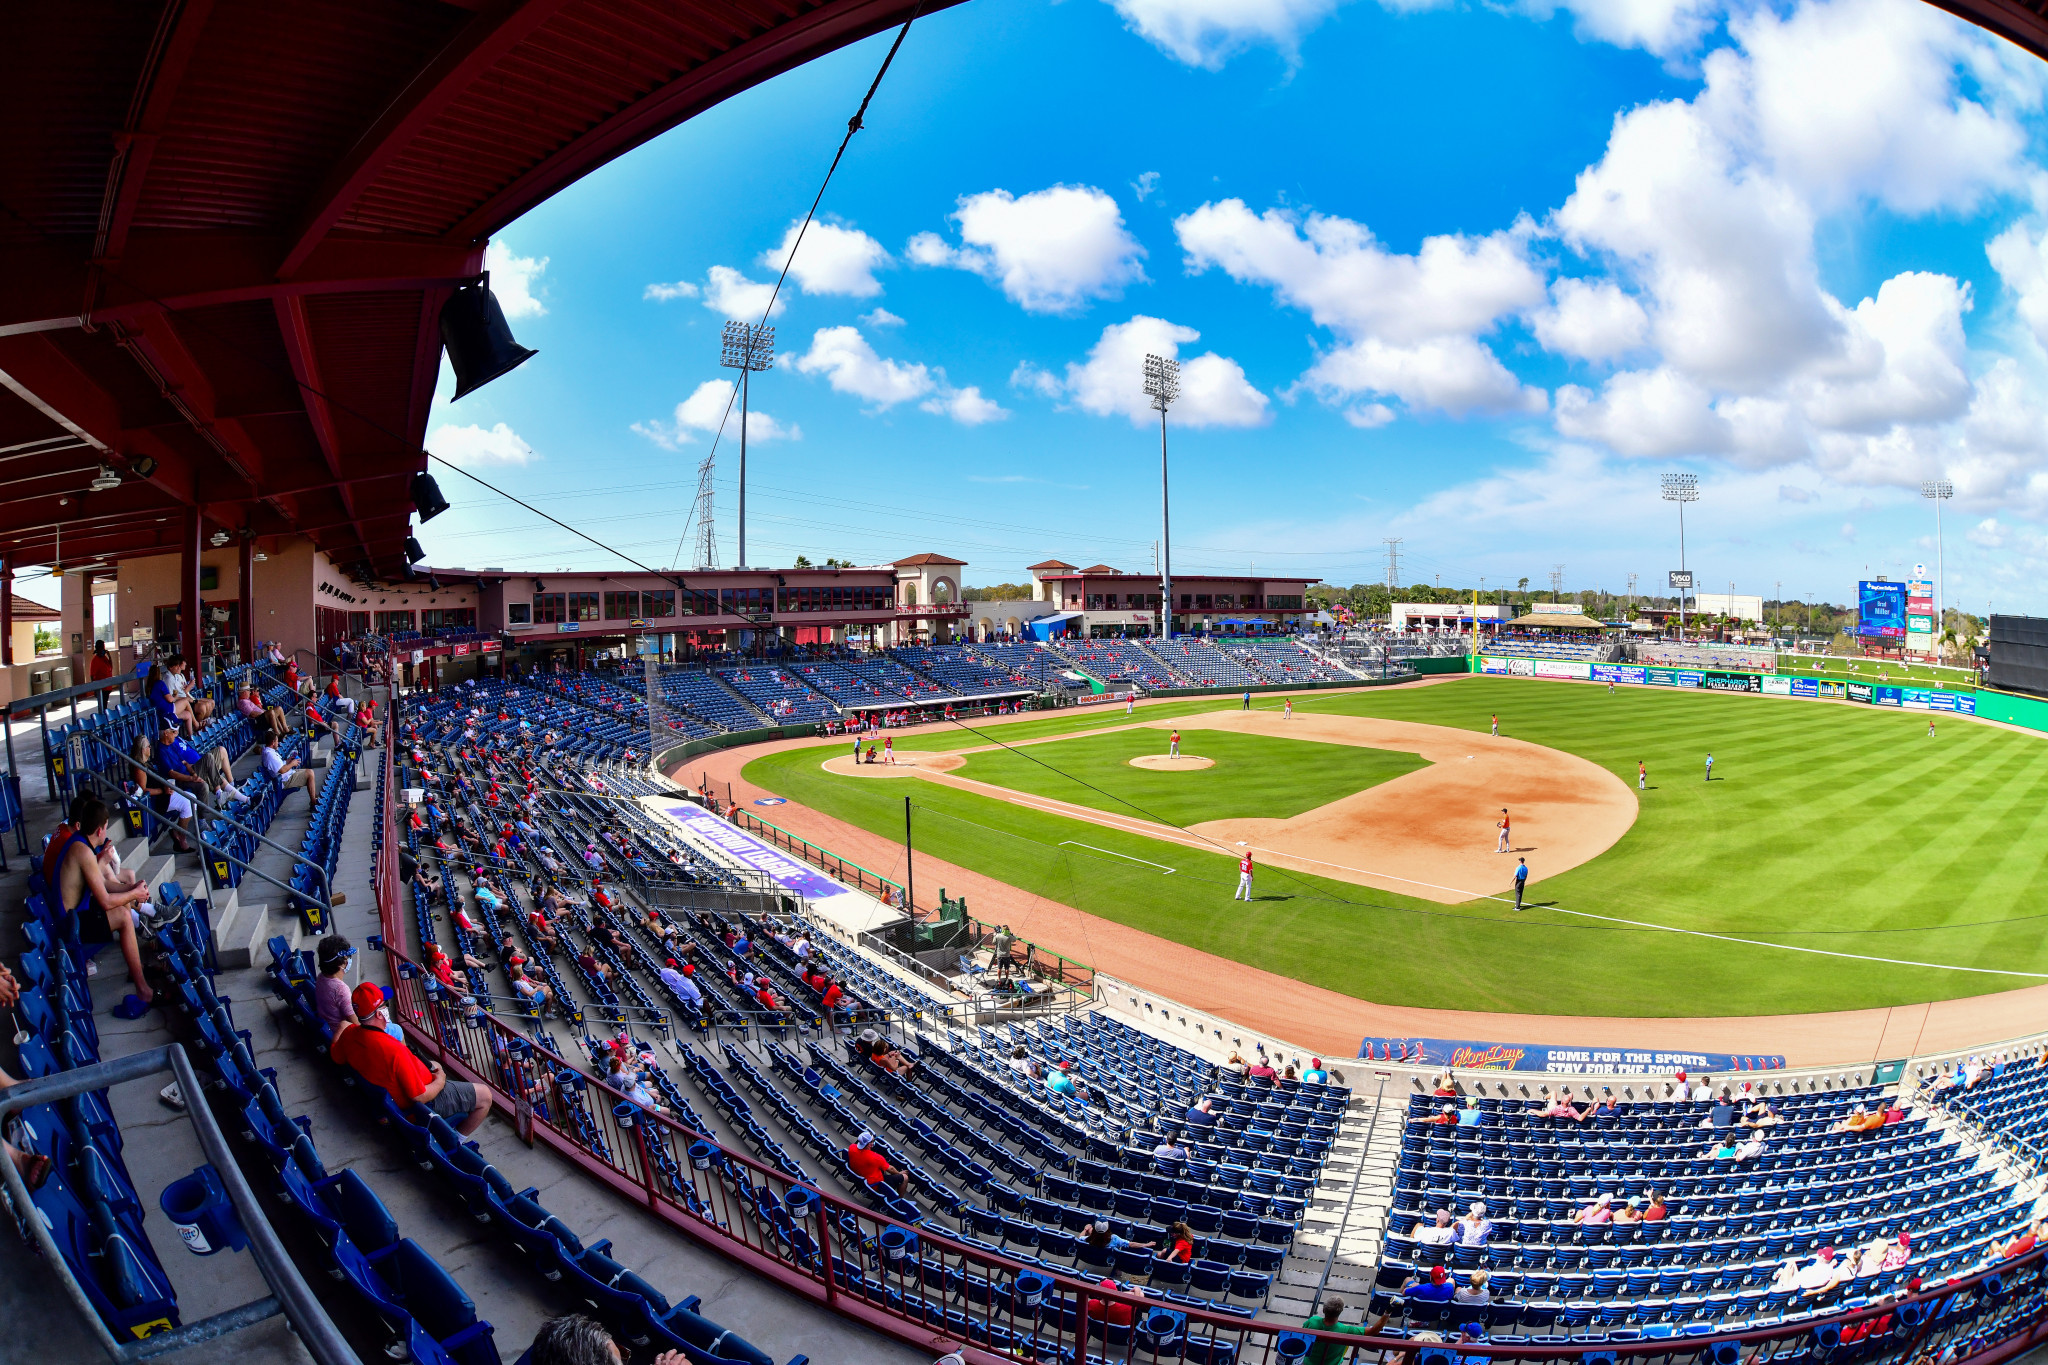 Florida is set to host the Americas baseball qualifier for Tokyo 2020 in early June ©Getty Images